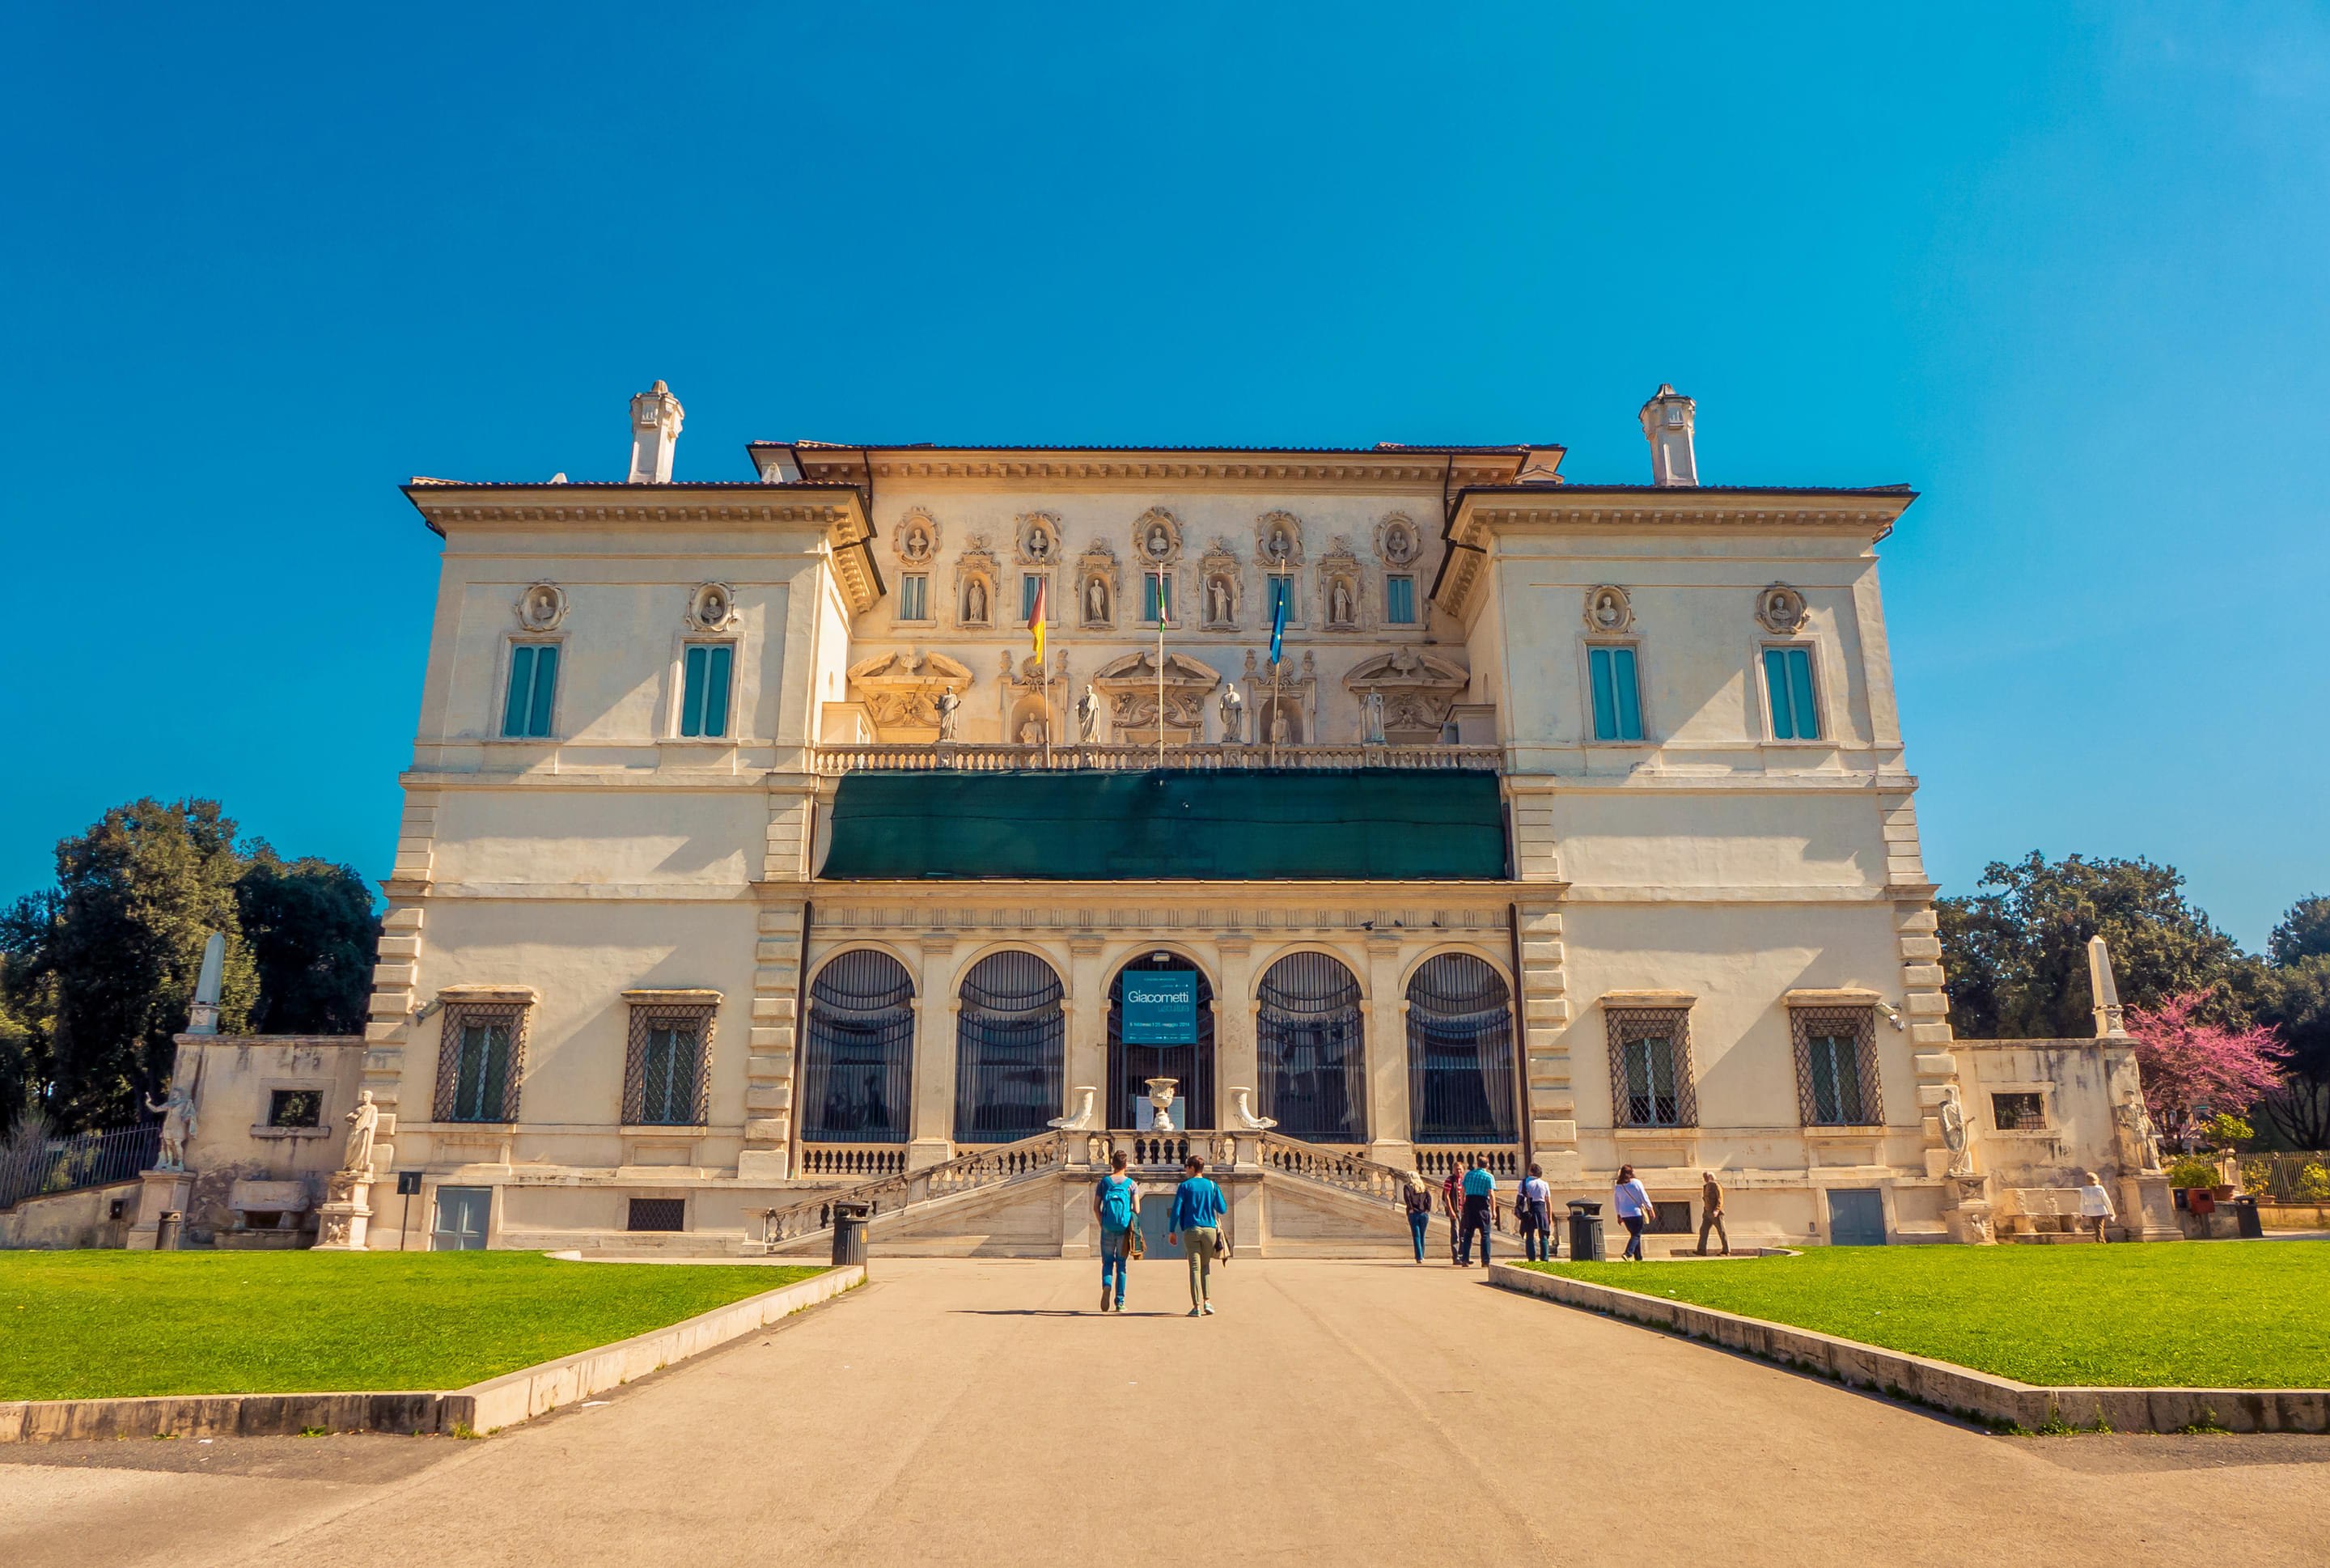 Borghese Gallery Overview